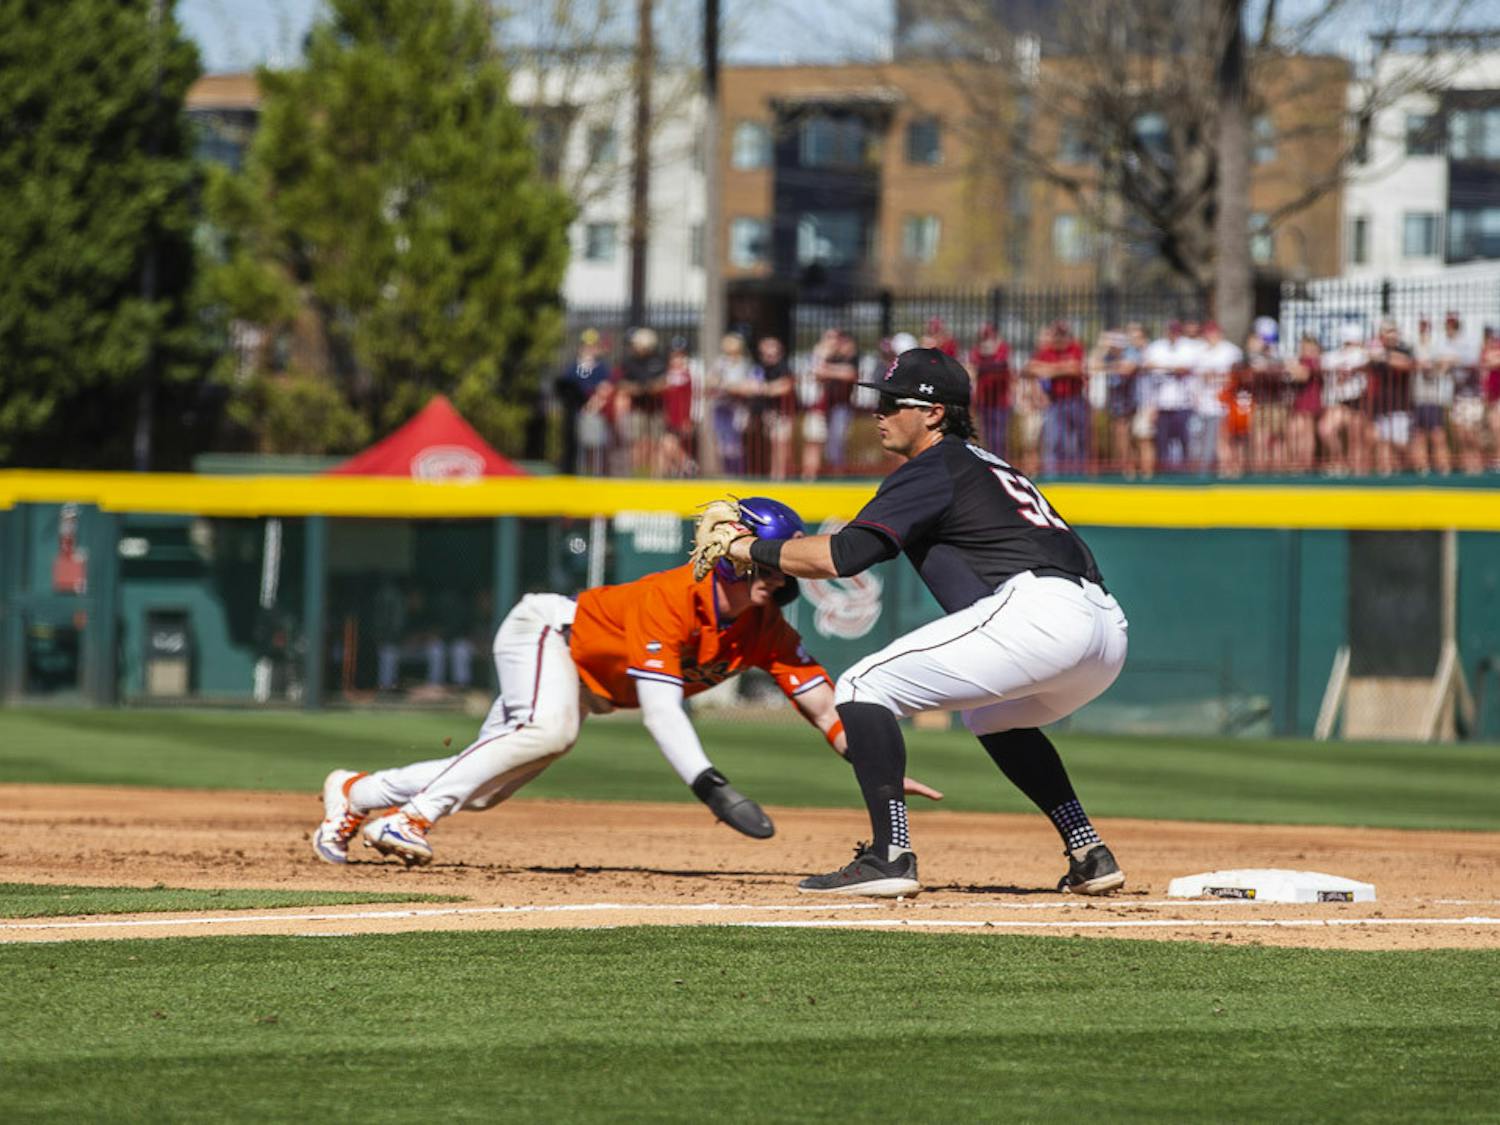 Junior first baseman Gavin Casas attempts to tag out Clemson's runner during the third game of the series between South Carolina and Clemson on March 5, 2023. The Gamecocks beat the Tigers 7-1, winning 2-1 in the series.&nbsp;